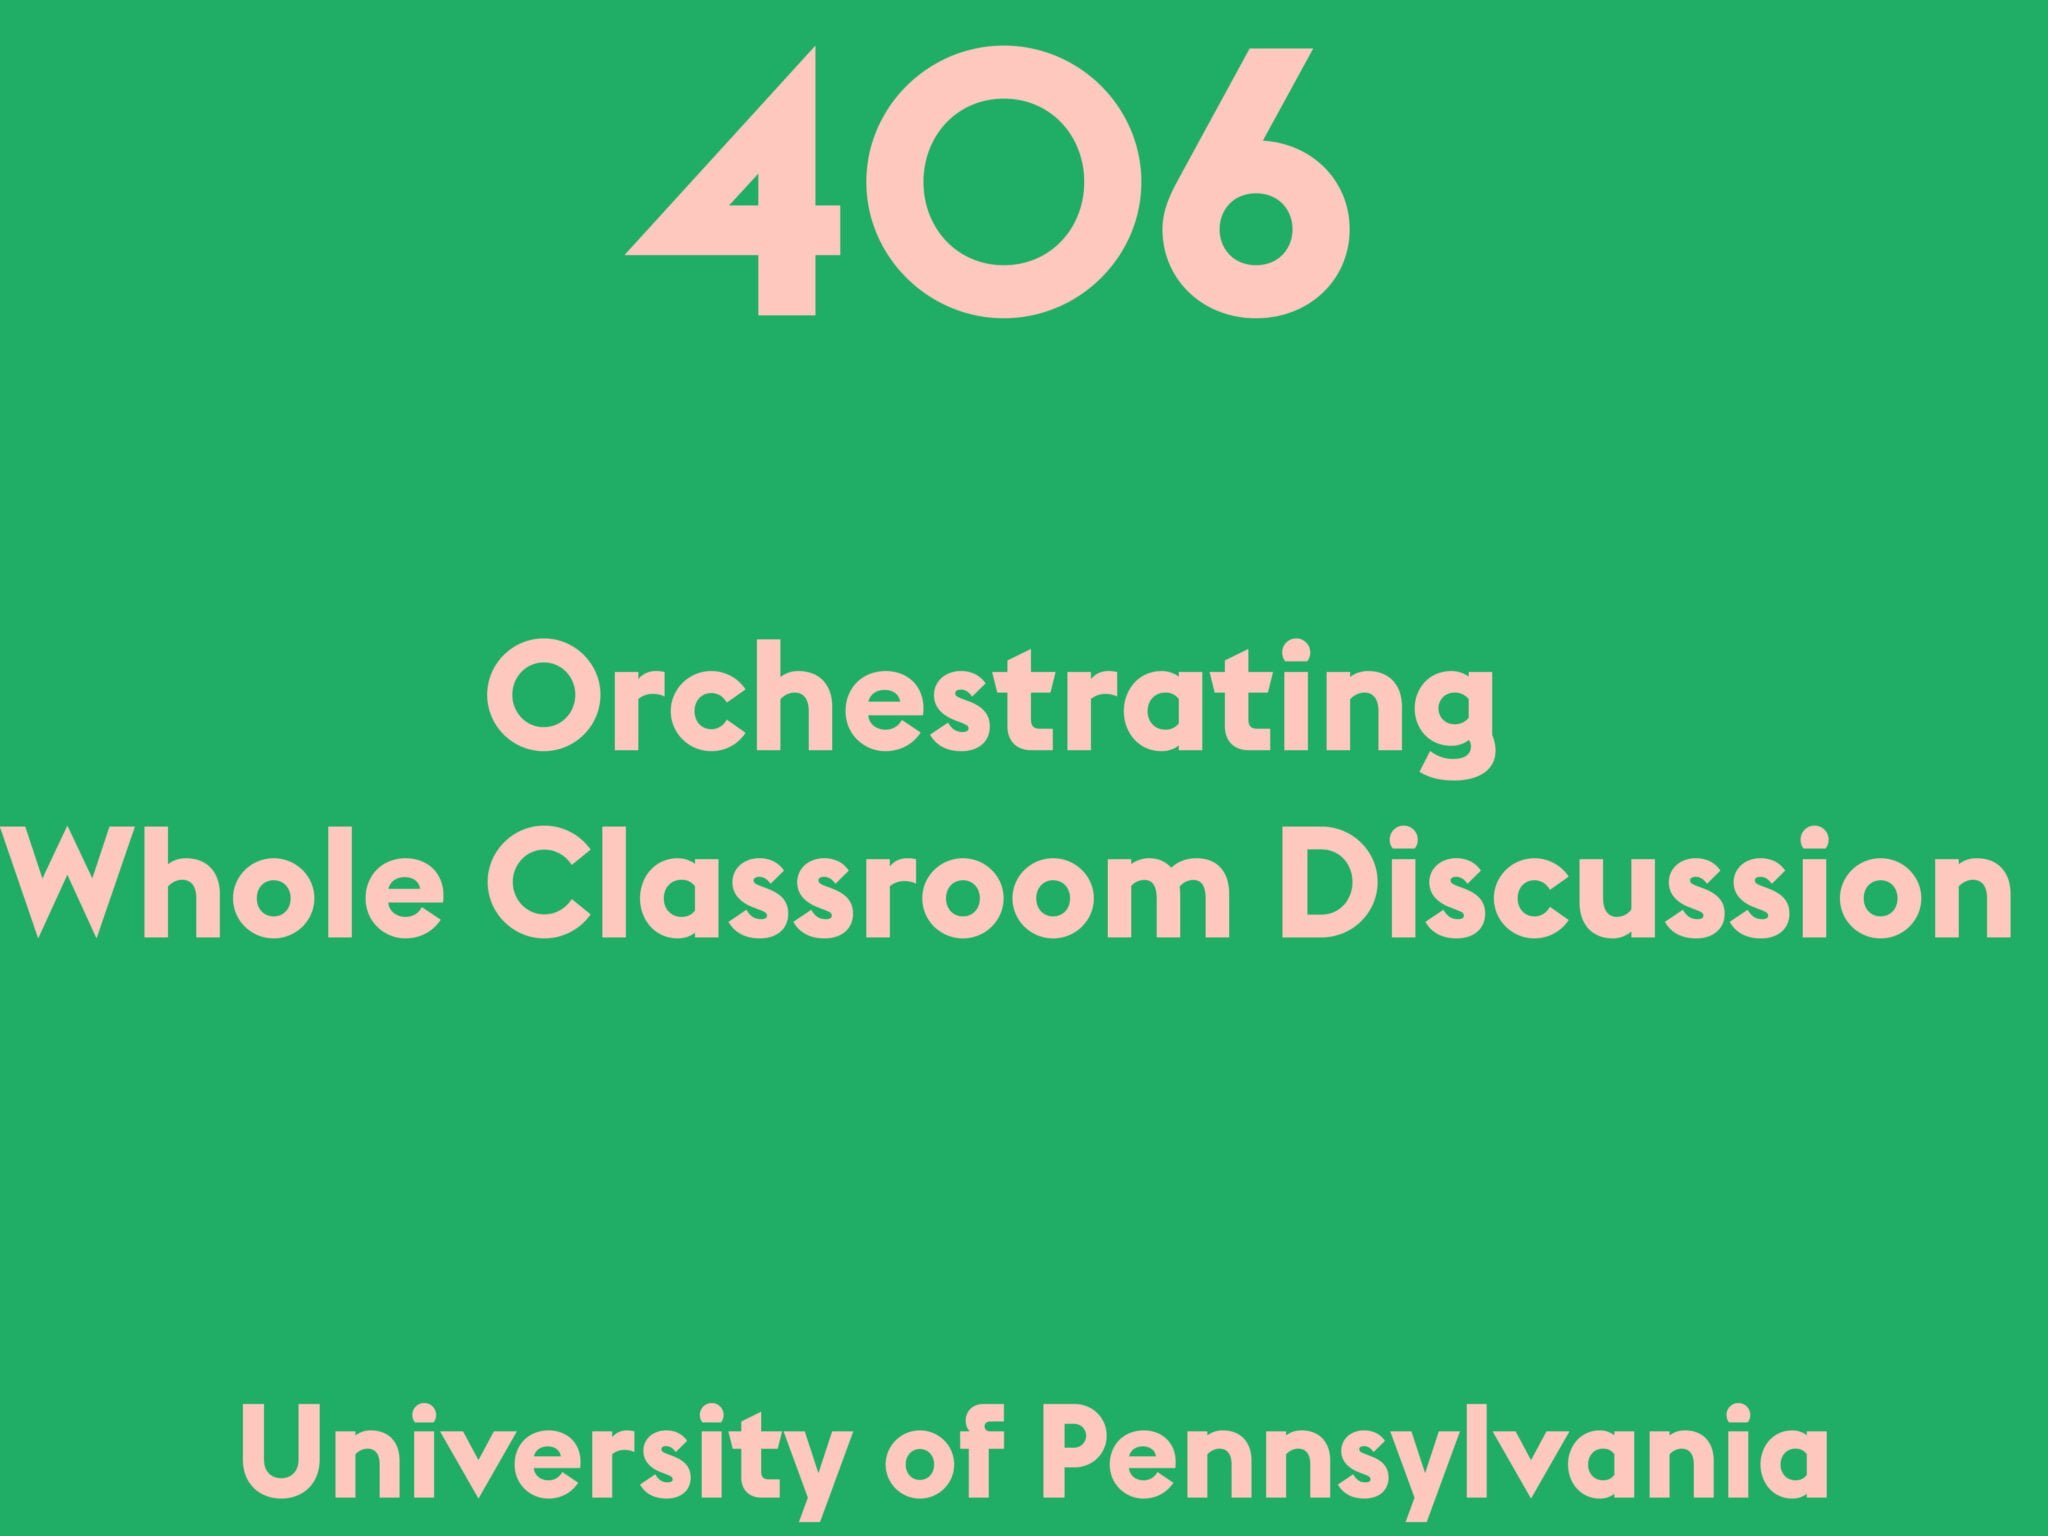 Orchestrating Whole Classroom Discussion